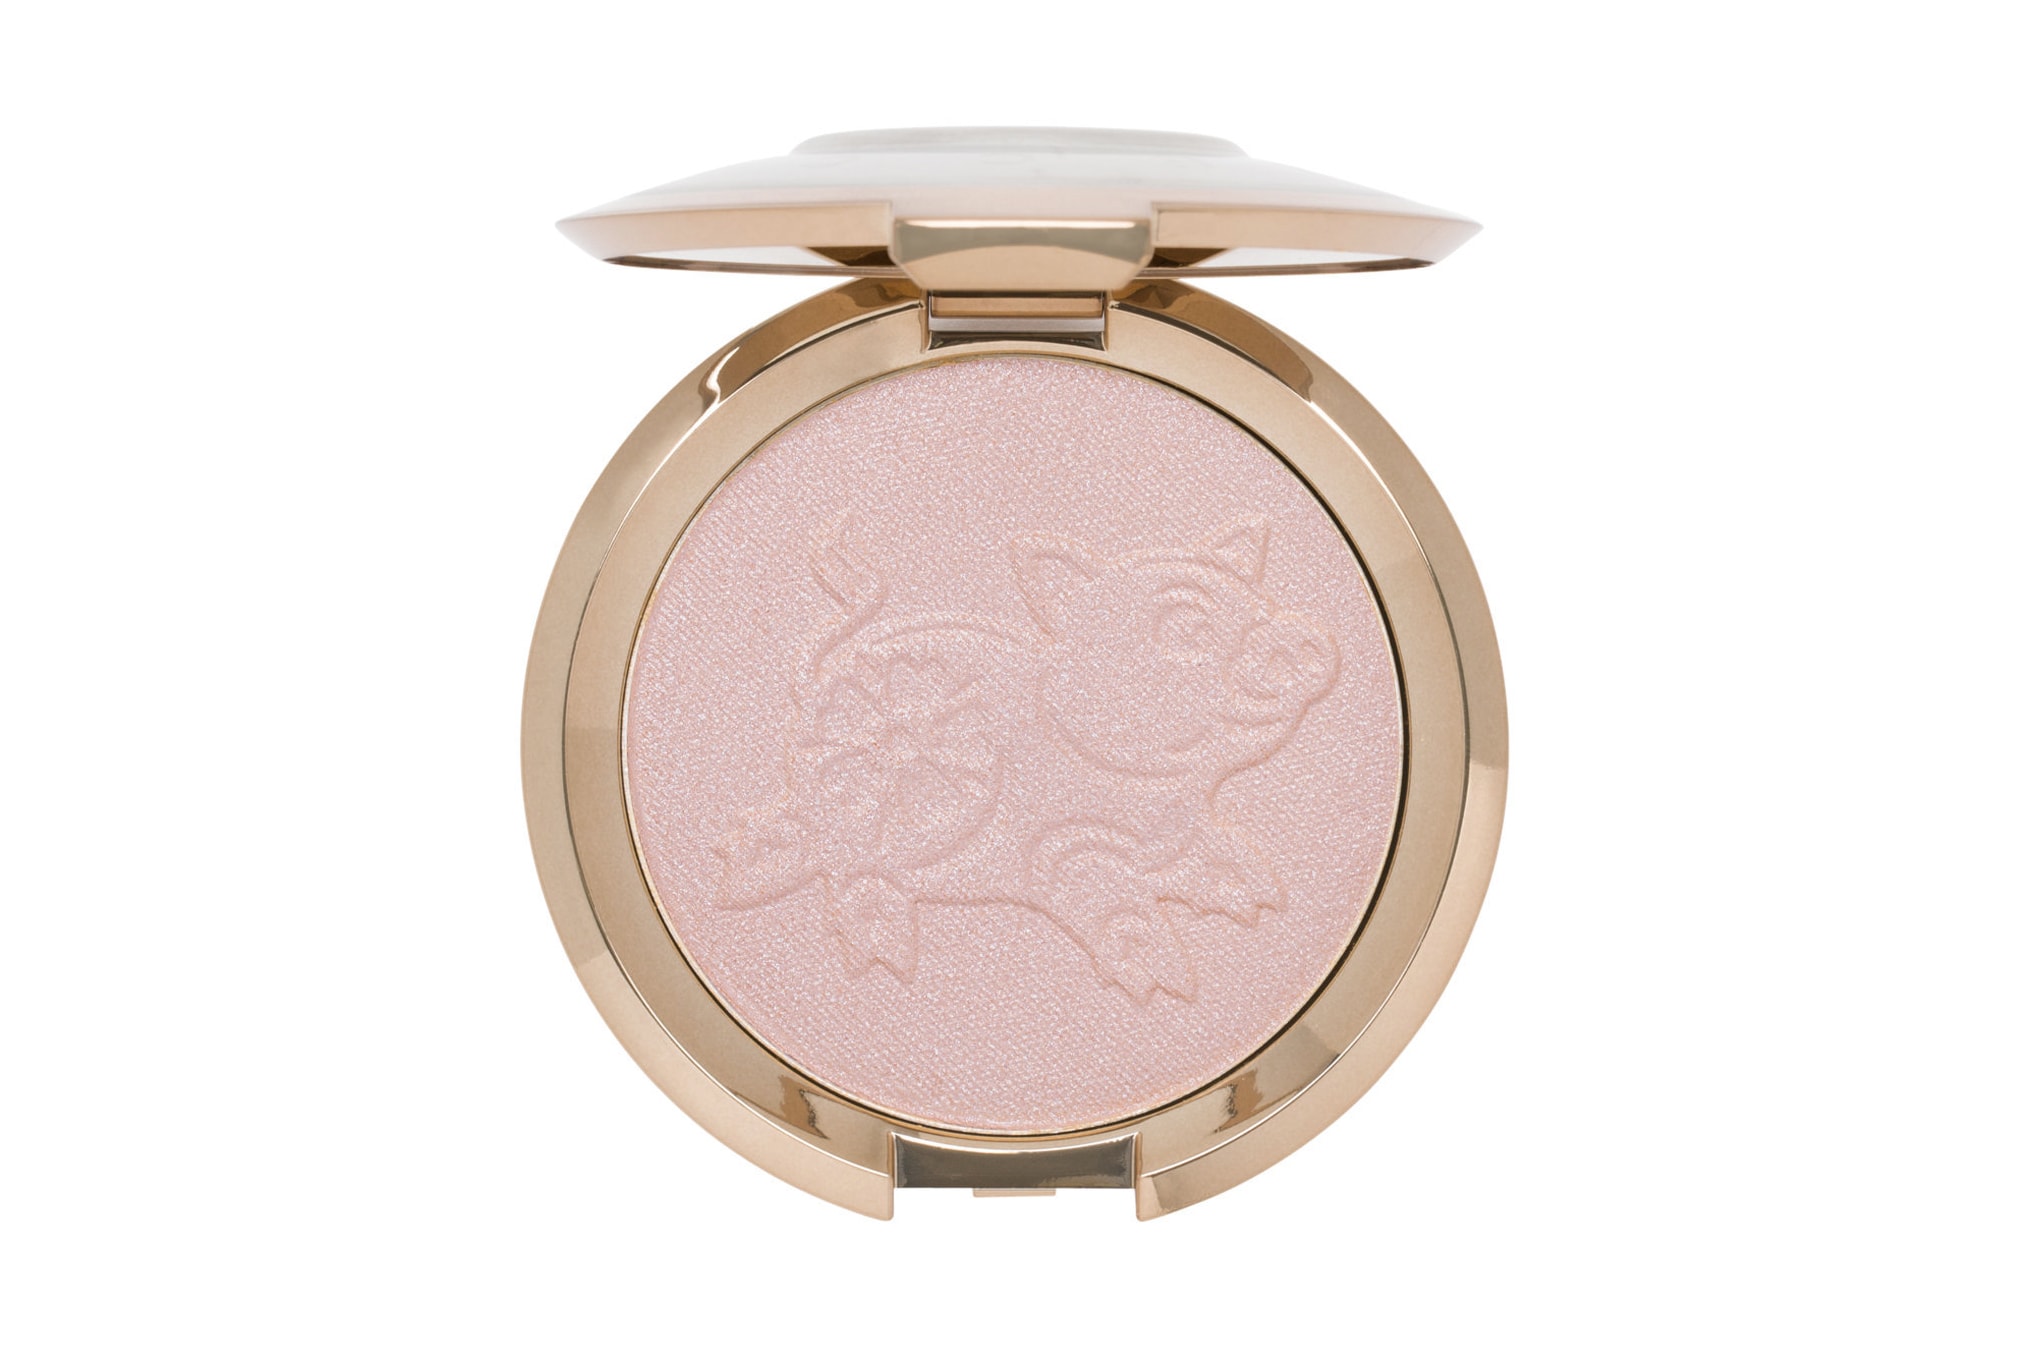 BECCA Cosmetics Chinese New Year Highlighter Shimmer Beauty Makeup CNY Year of the Pig 